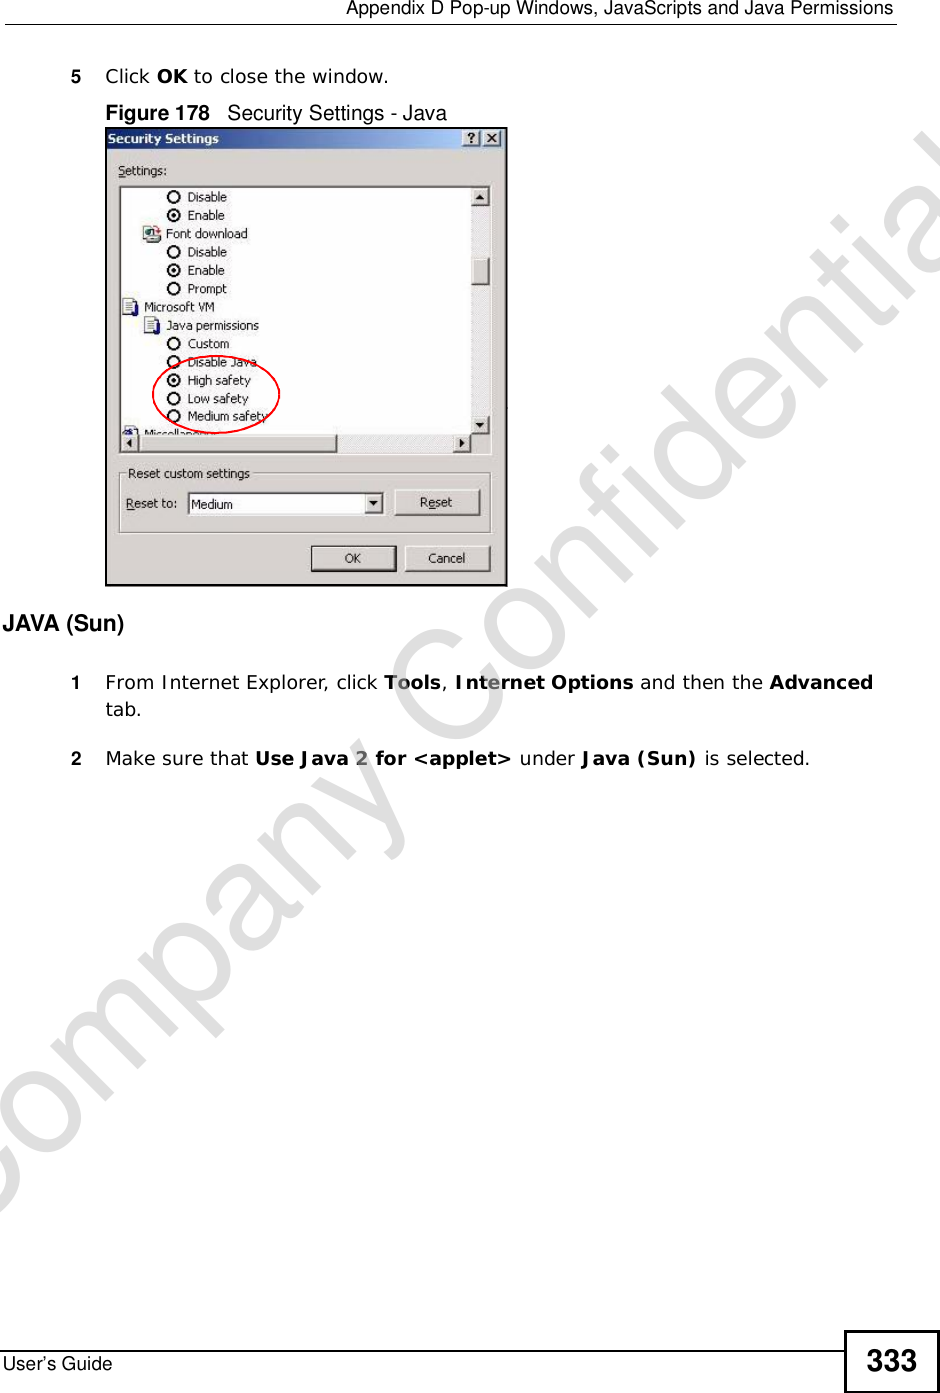  Appendix DPop-up Windows, JavaScripts and Java PermissionsUser’s Guide 3335Click OK to close the window.Figure 178   Security Settings - Java JAVA (Sun)1From Internet Explorer, click Tools,Internet Options and then the Advancedtab. 2Make sure that Use Java 2 for &lt;applet&gt; under Java (Sun) is selected.Company Confidential